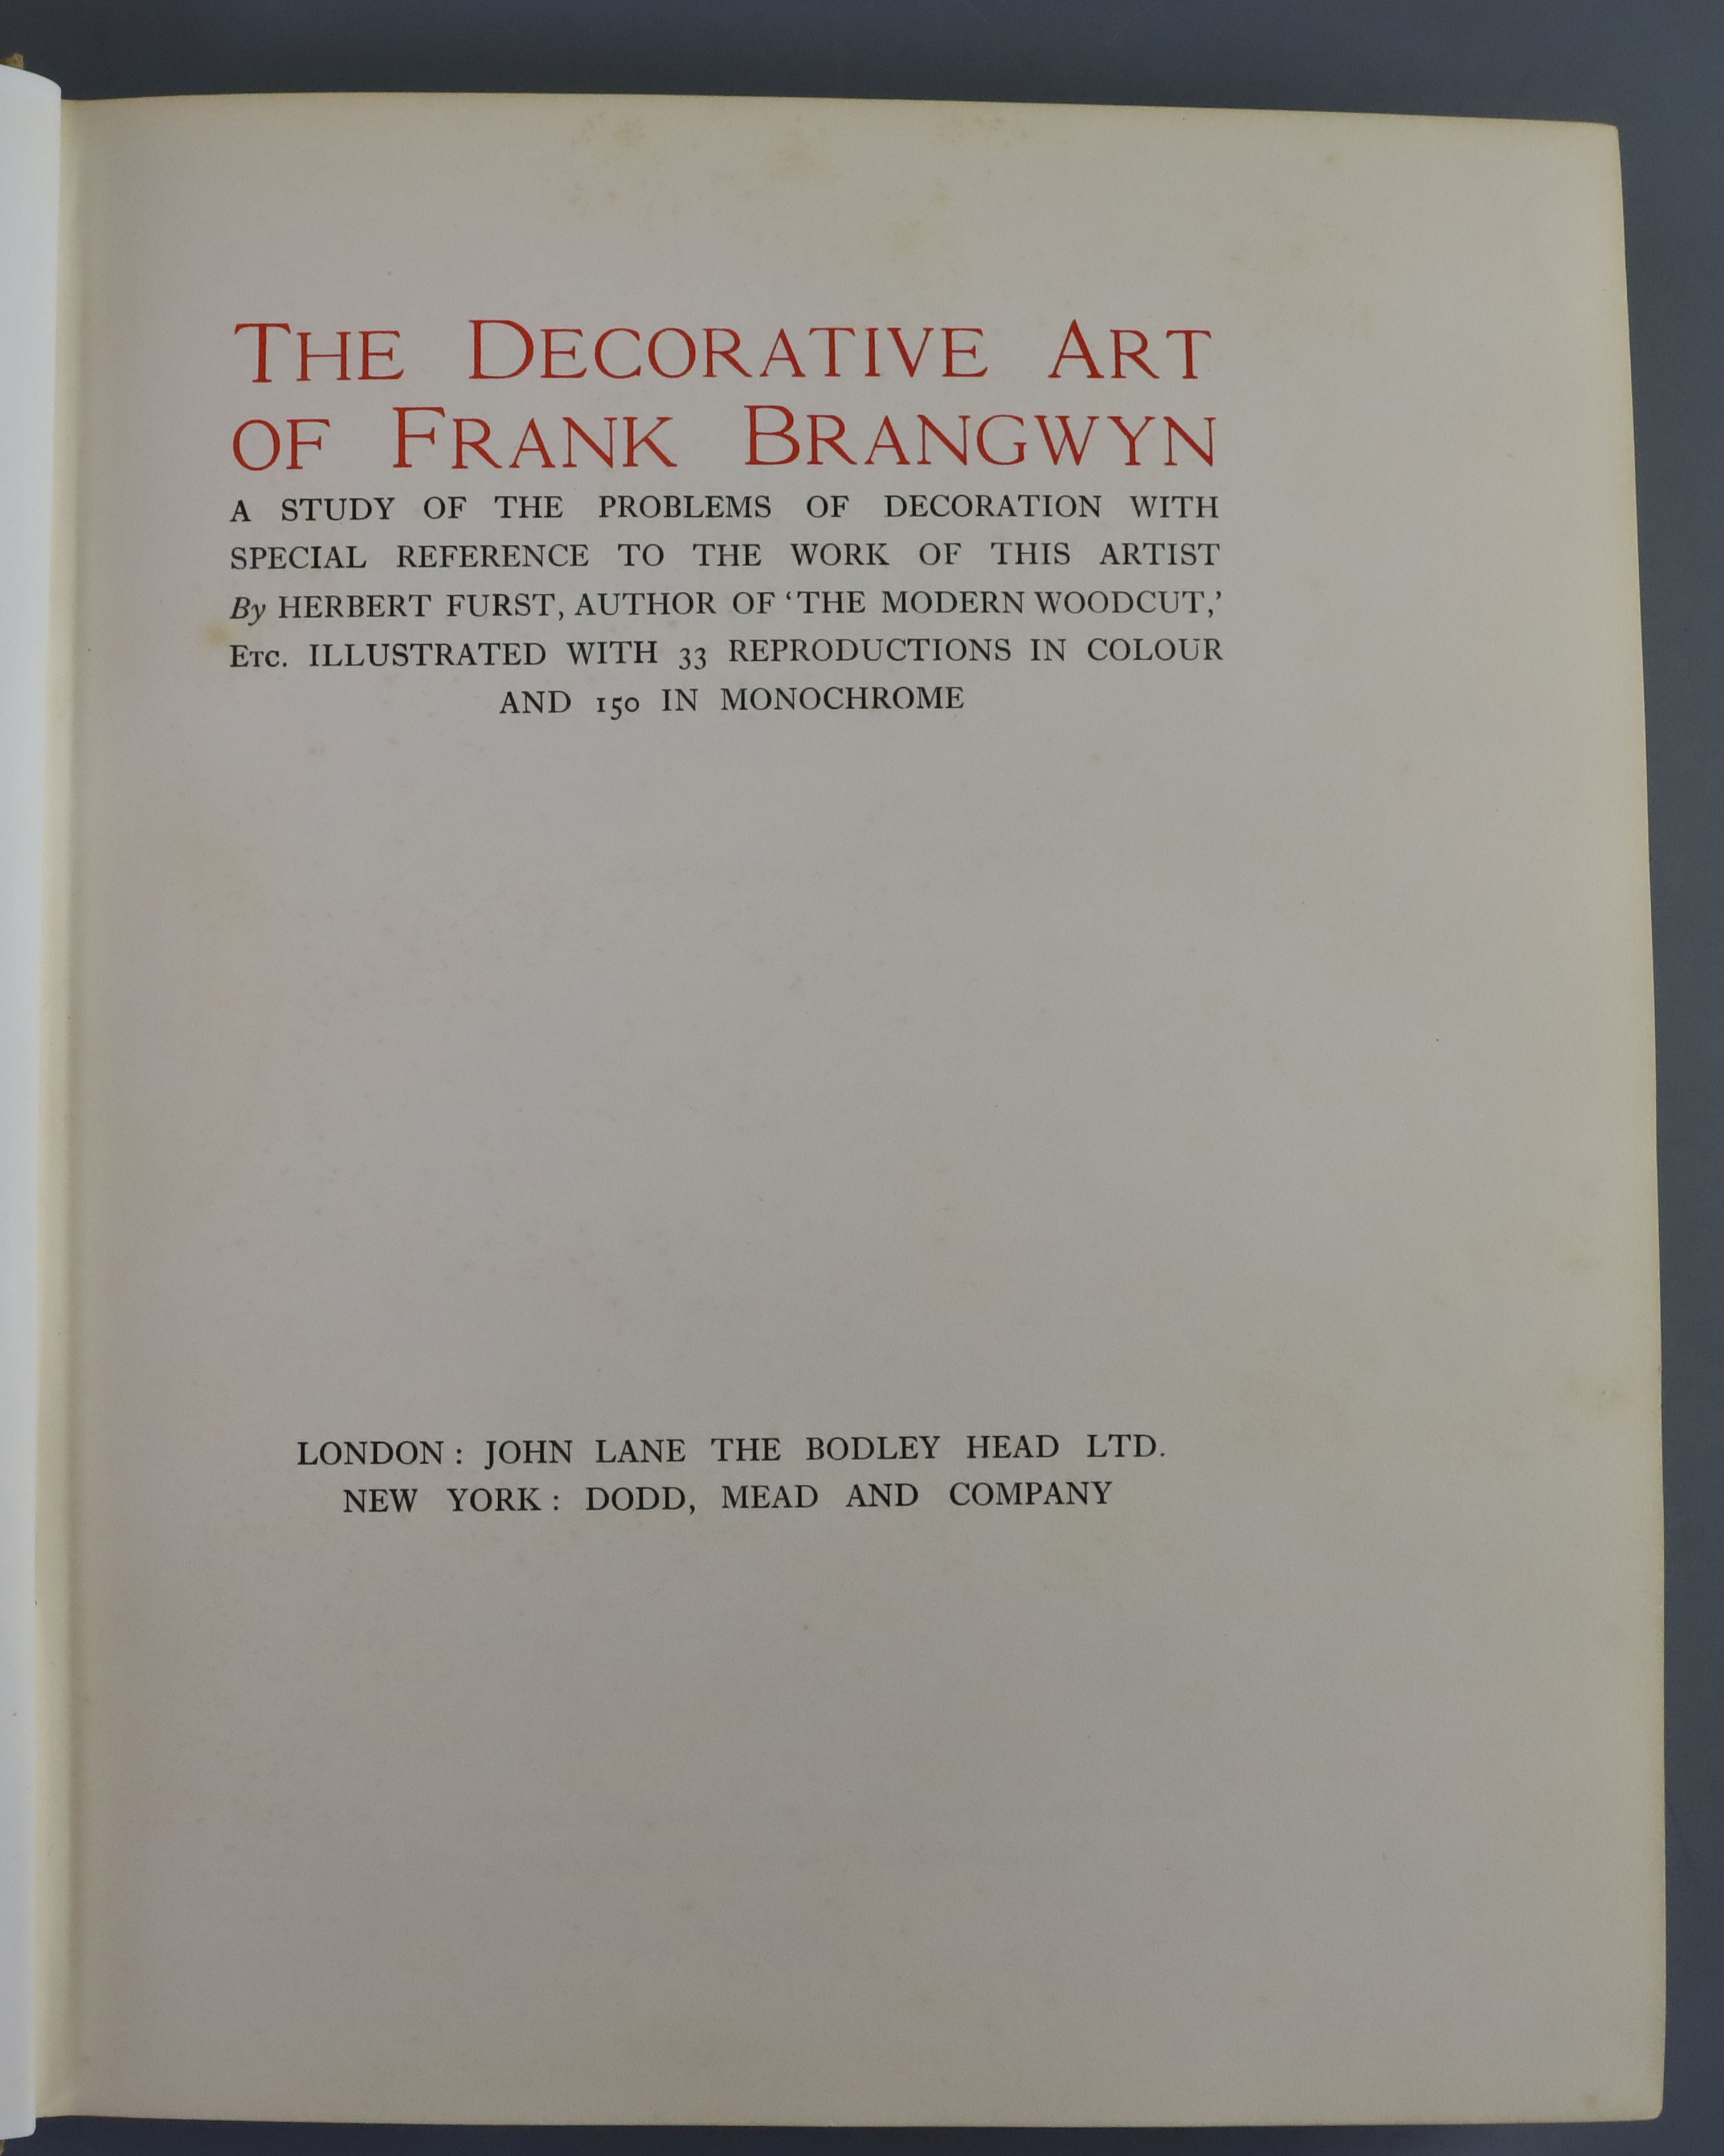 Furst, Herbert Ernest Augustus - The Decorative Work of Frank Brangwyn, qto, cloth, with 33 colour